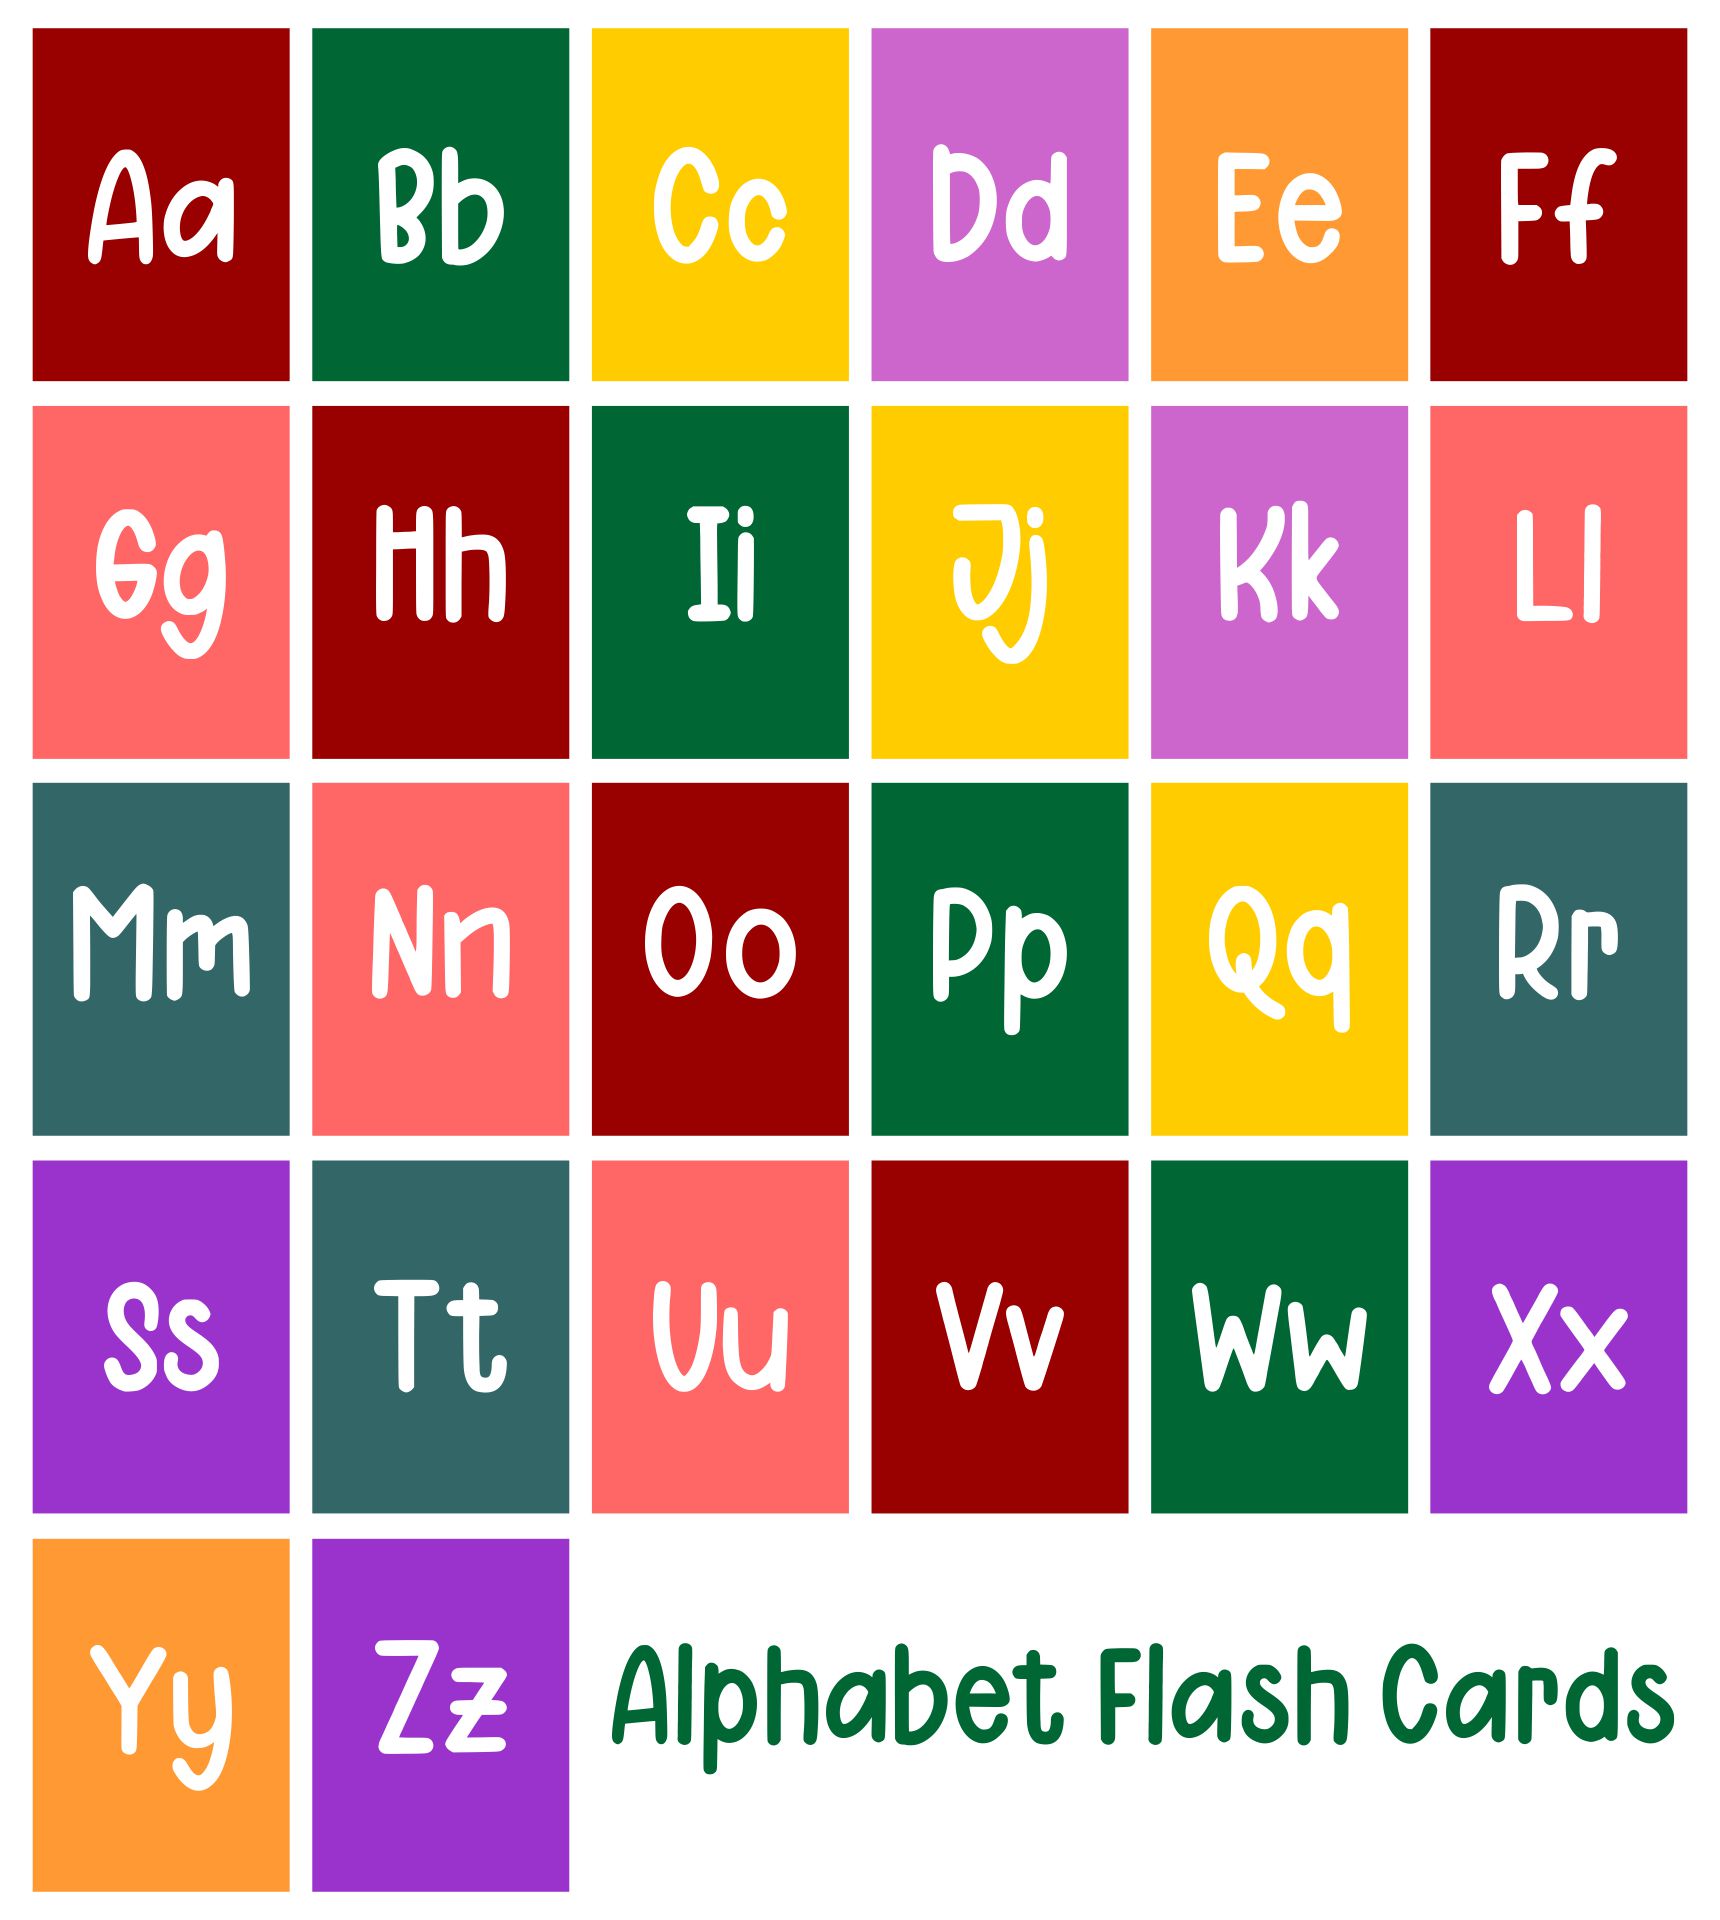 6 Best Images of Large Printable ABC Flash Cards - Large ...